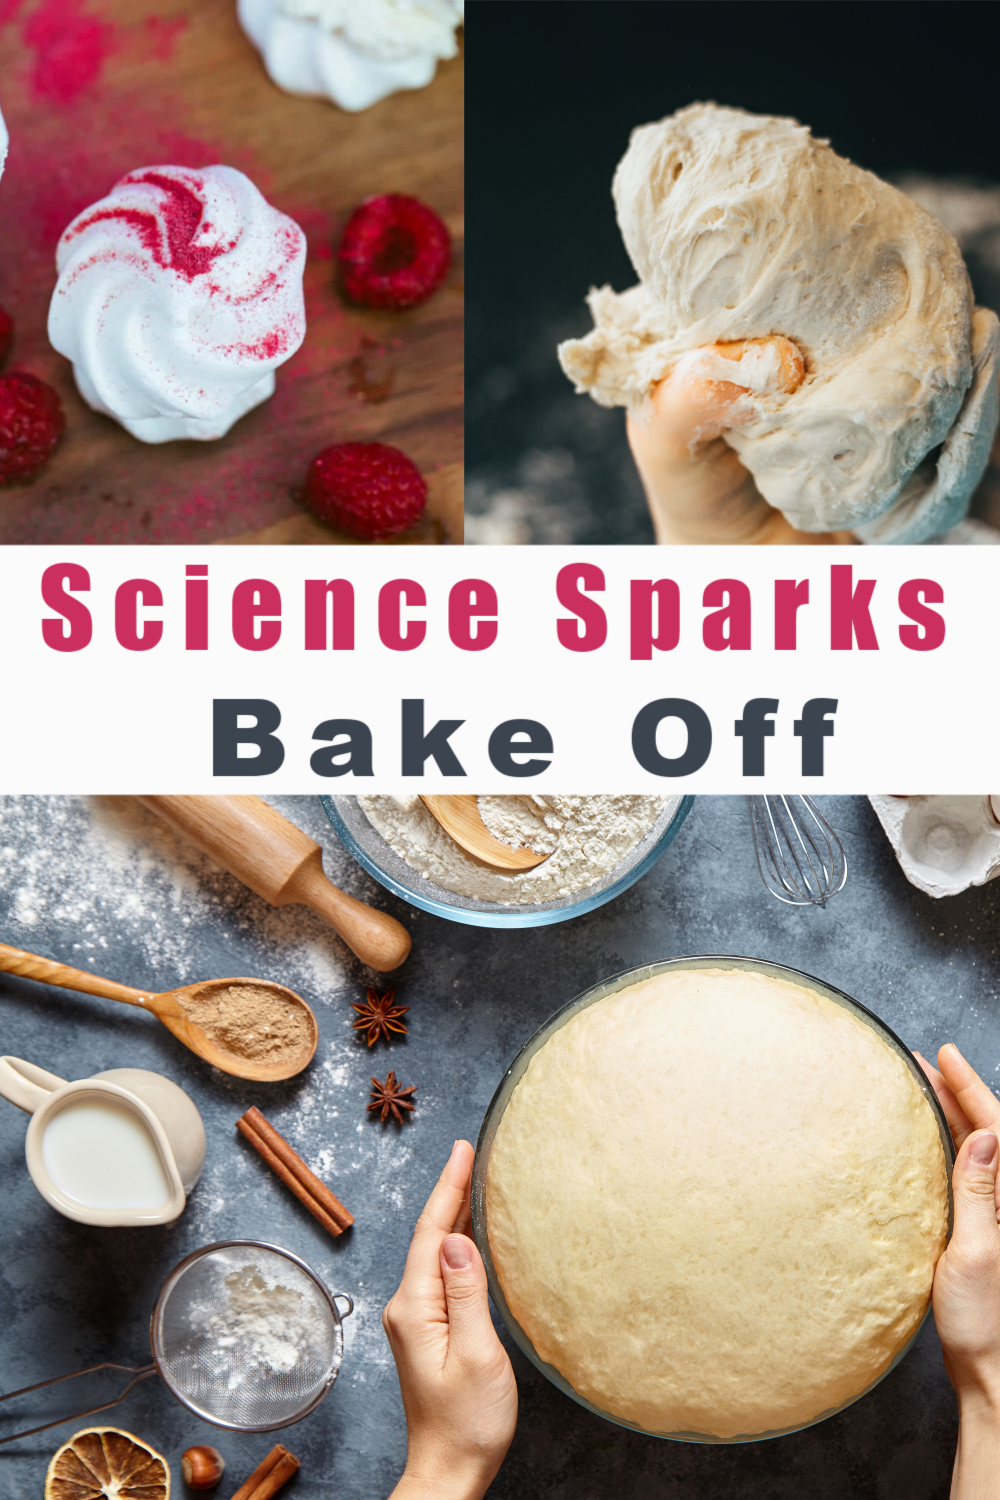 Science in the kitchen - have a bake off!